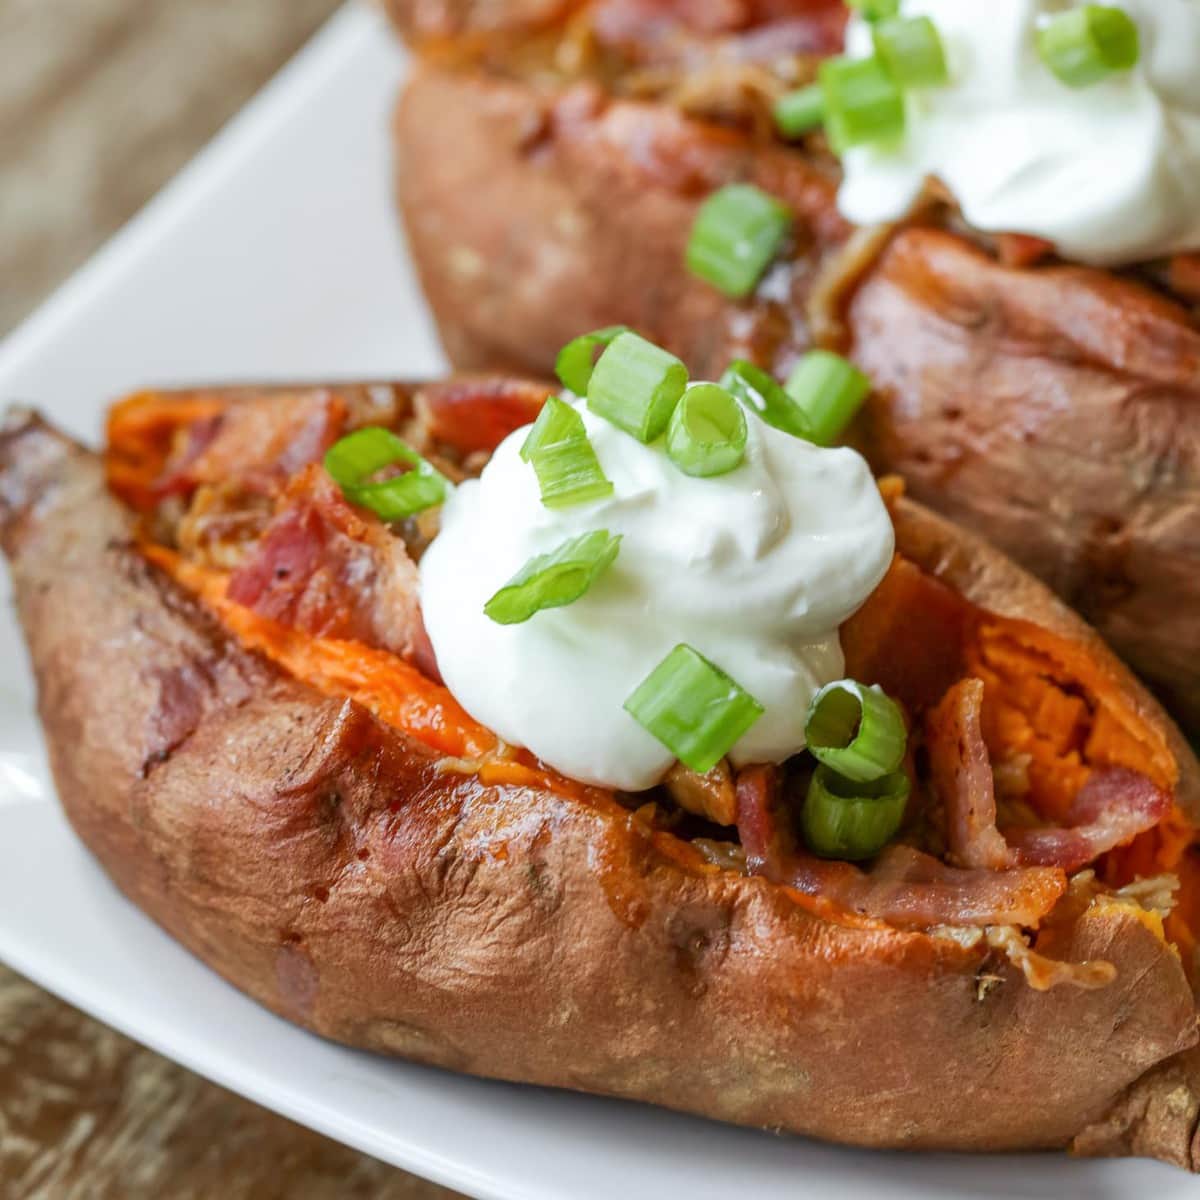 Quick dinner ideas - pork stuffed sweet potatoes topped with sour cream.